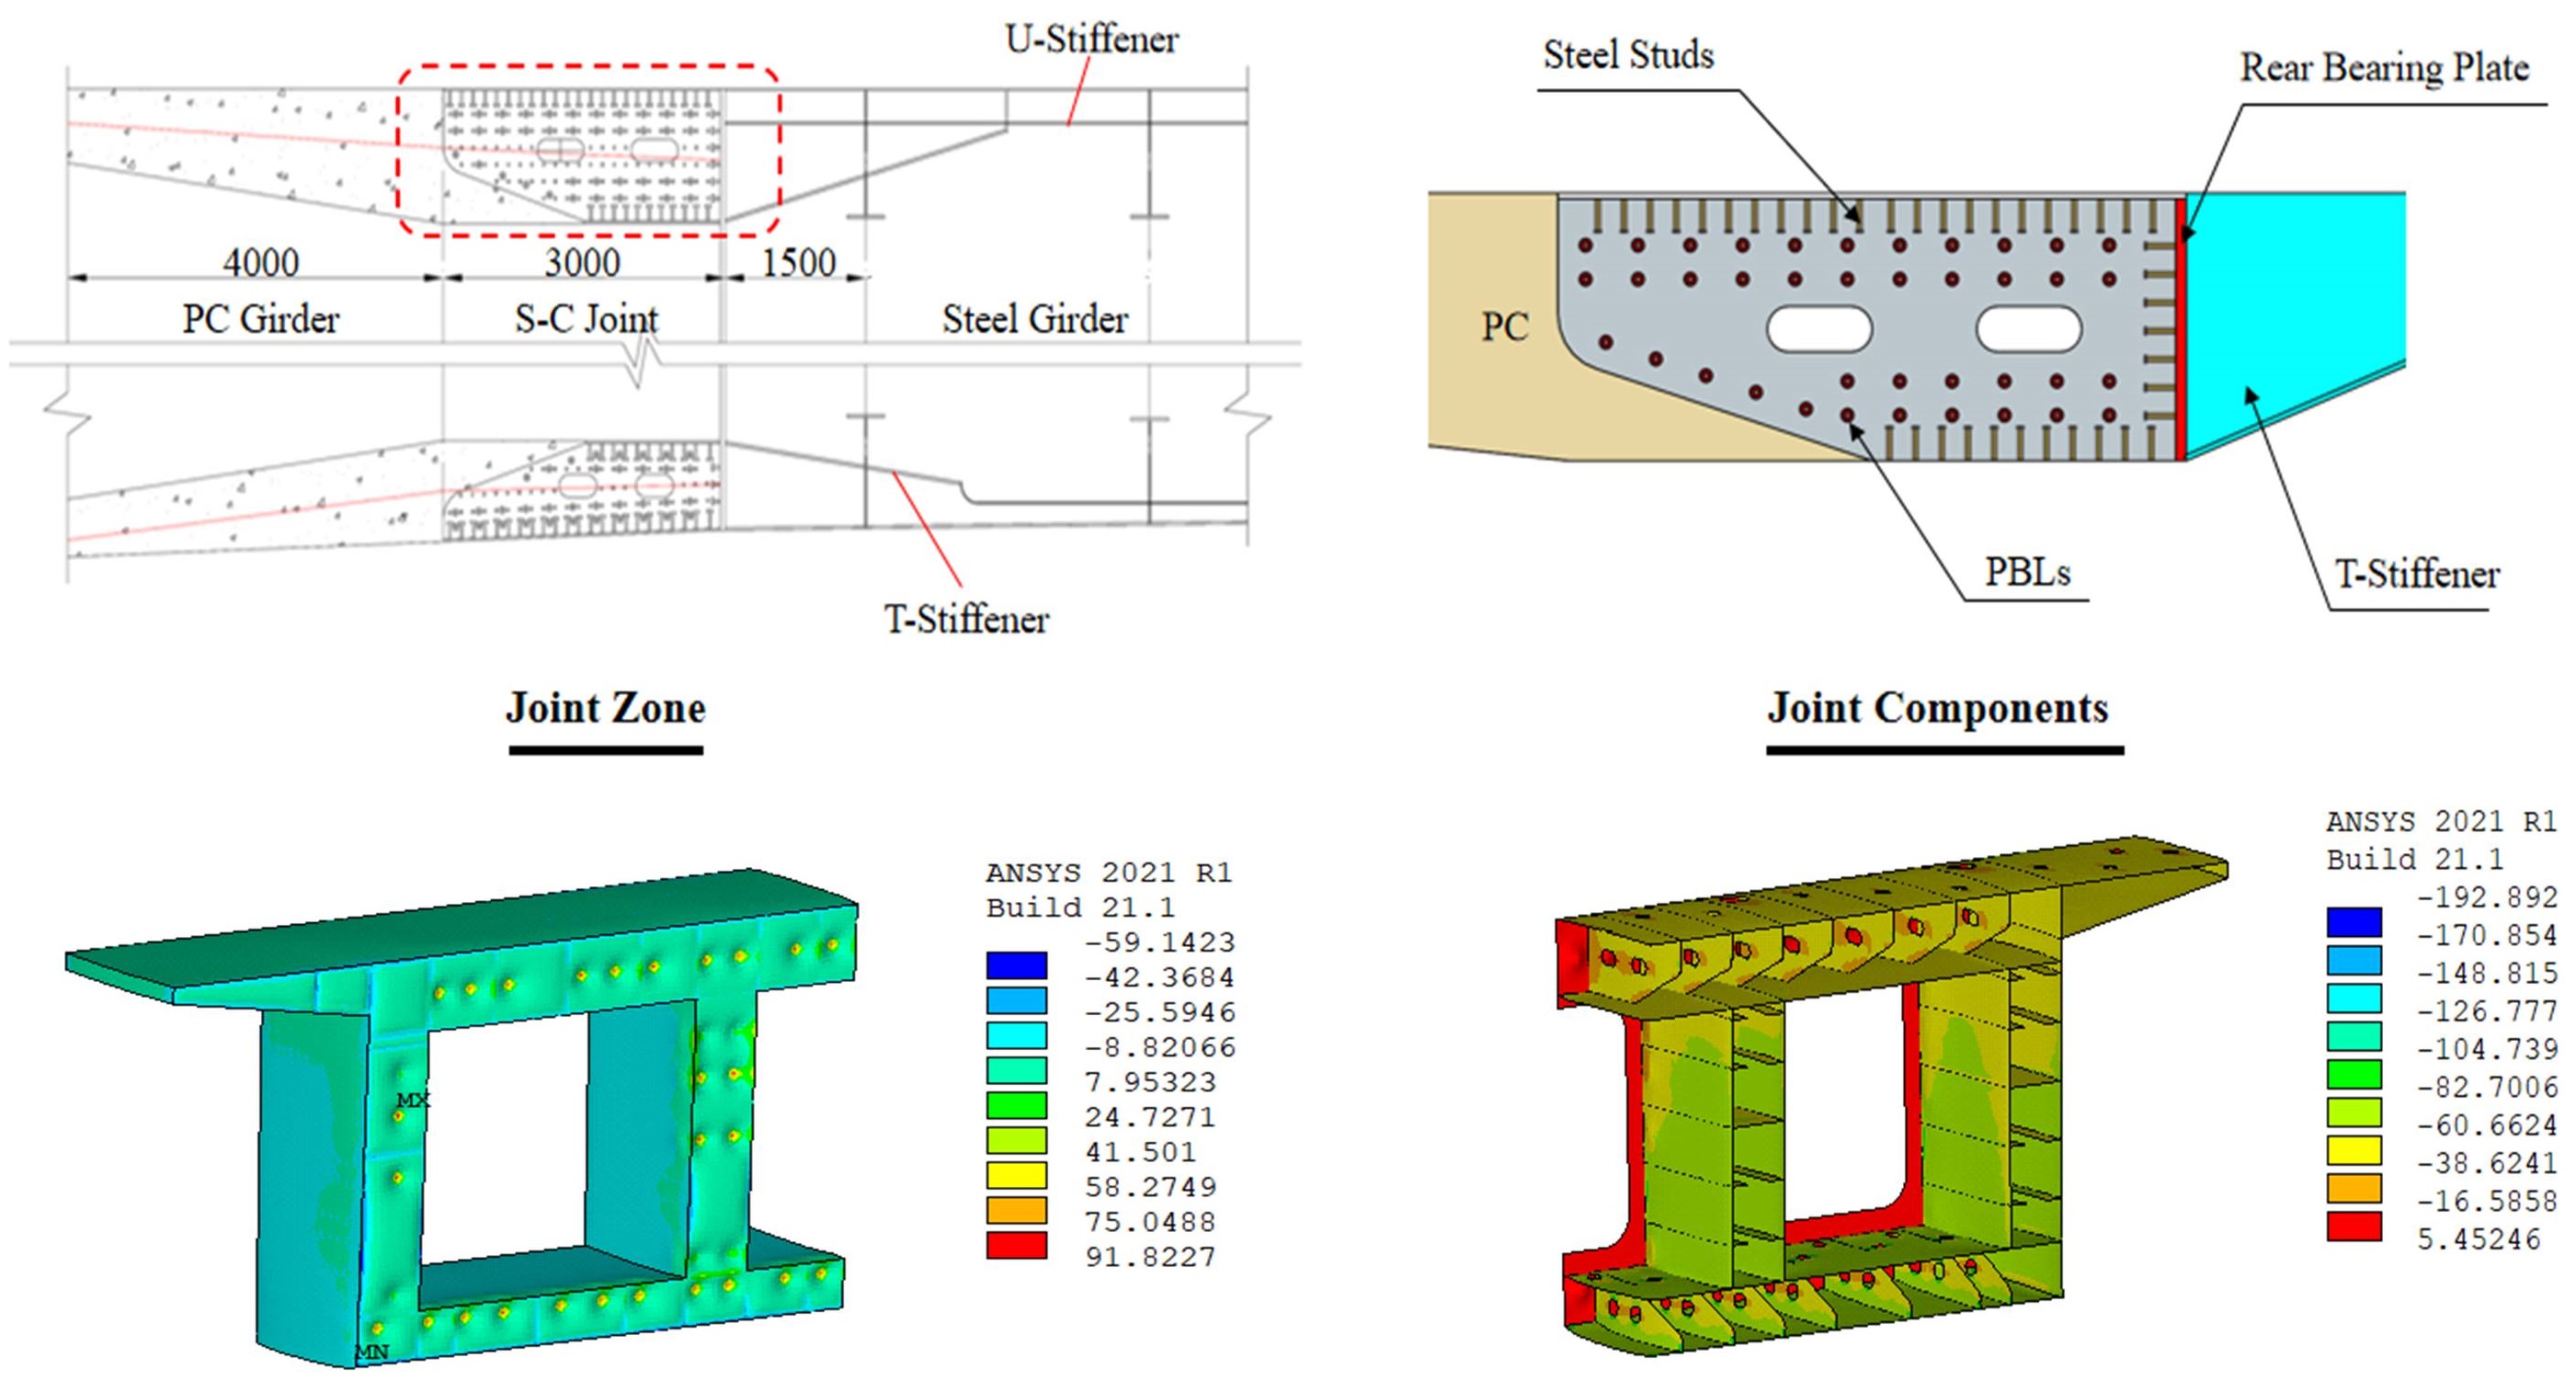 Evaluation of structural performance of steel-concrete joints in Hybrid Girder Bridges